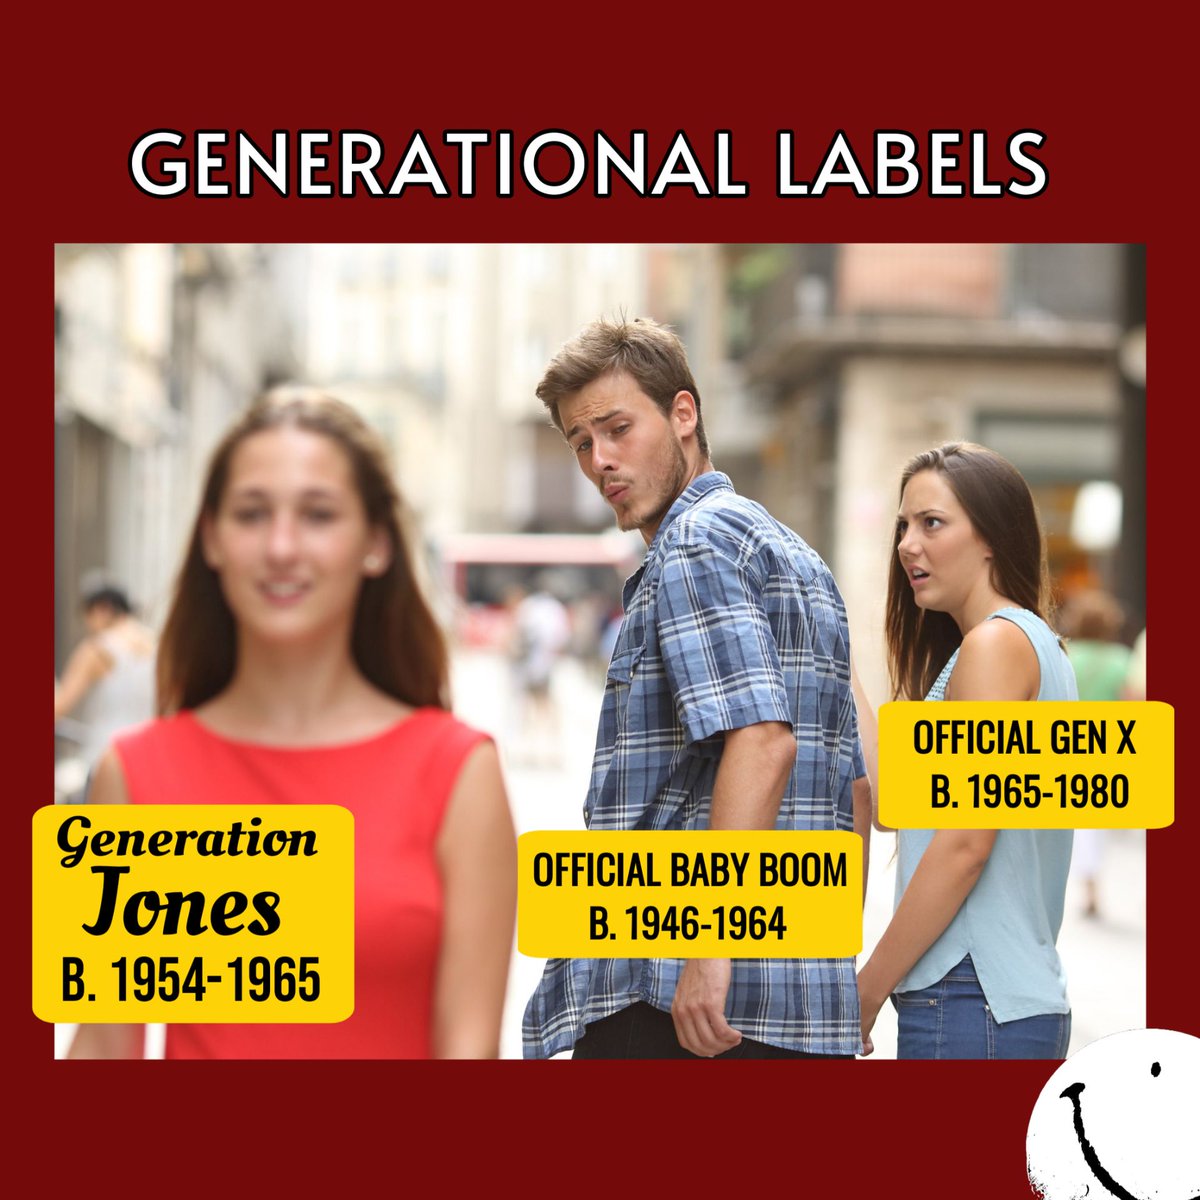 The struggle is real

#generationjones #whoisgenerationjones #generationallabels #borninthe50s #borninthe60s #lateboomers #earlyXers #generationX #babyboom #uscensus